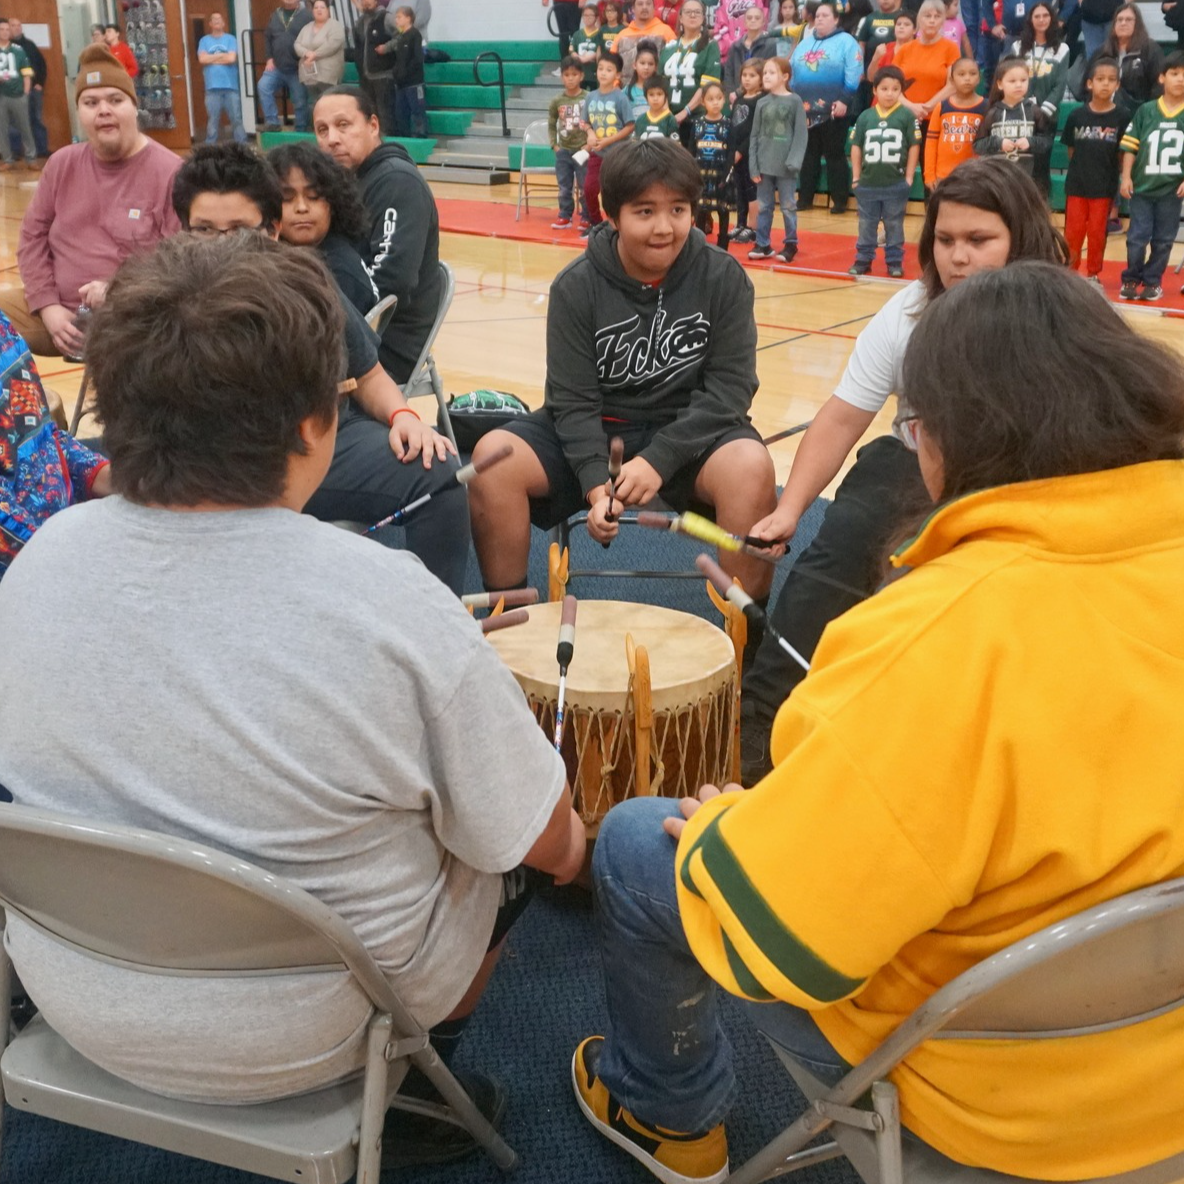 Young boys practice in drum circle together